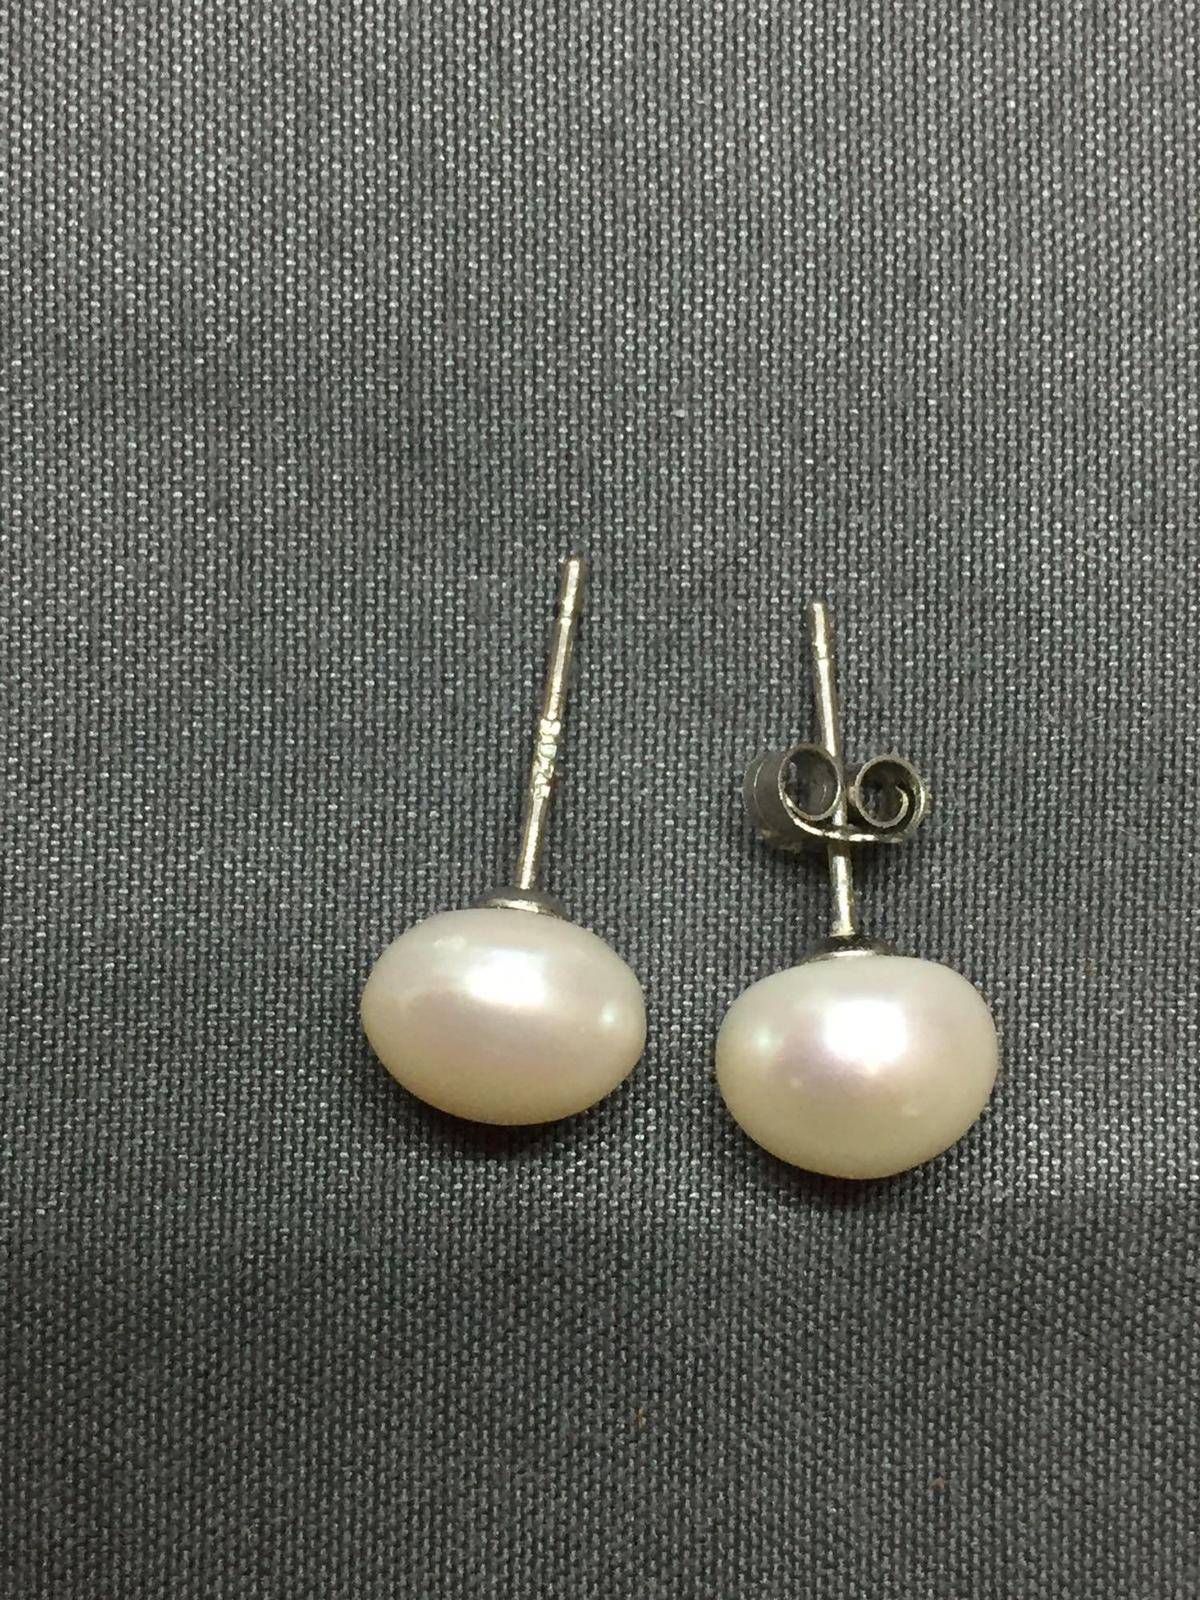 Round 8.5mm White Pearl Pair of Sterling Silver Stud Earrings